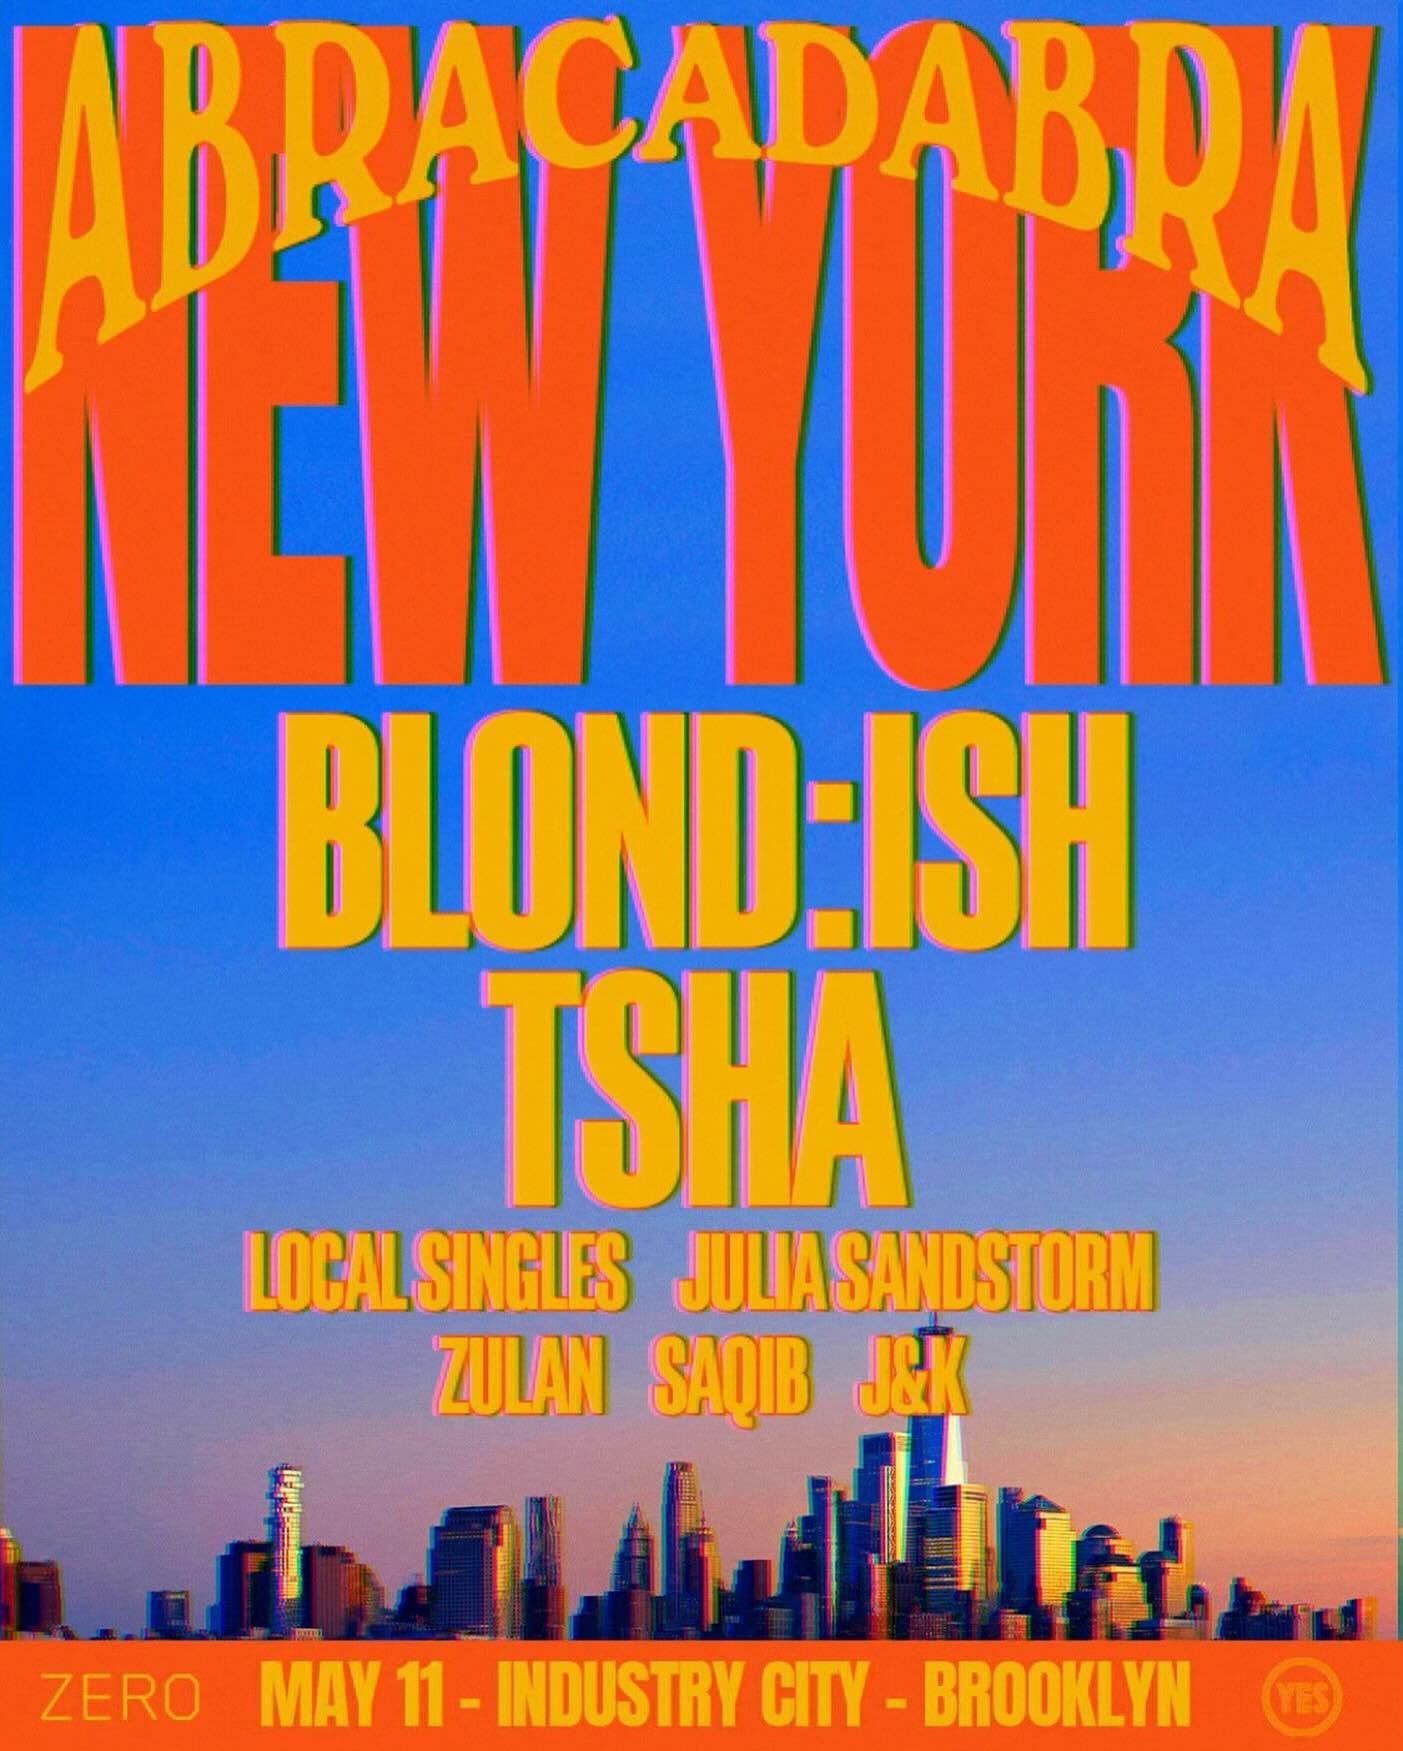 🚨 Don&rsquo;t miss Blond:ish at Industry City on May 11 🚨

Show up early to catch TSHA, Local Singles, Julia Sandstorm, Zulan, Saqib, J&amp;K. Good music start to finish 👀

Tickets are available now at closedsessions.live // link in bio

Cc: @buil